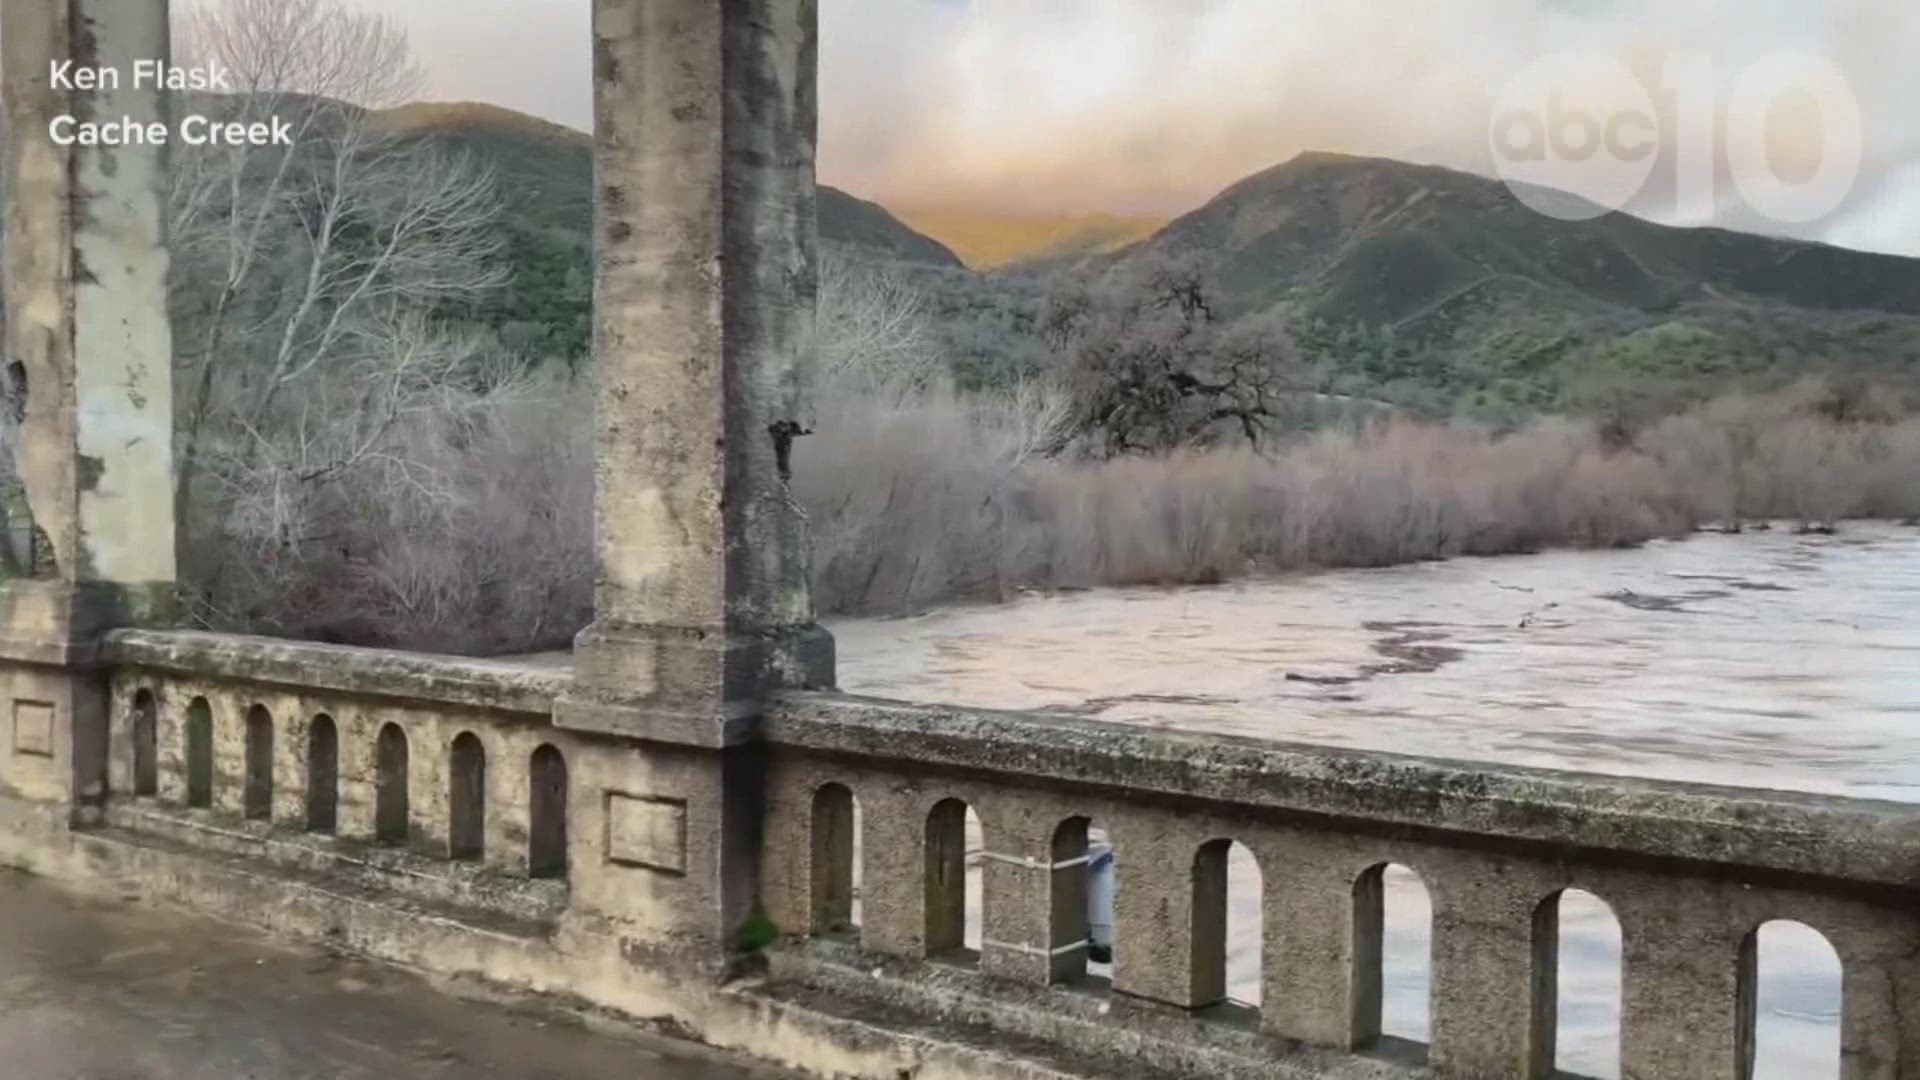 The River gauge is high on Cache Creek north of Woodland, Calif. — where a "danger stage" is expected to be reached at 8 p.m. Thursday. Ken Flask shared this video, taken Thursday morning, with ABC10.